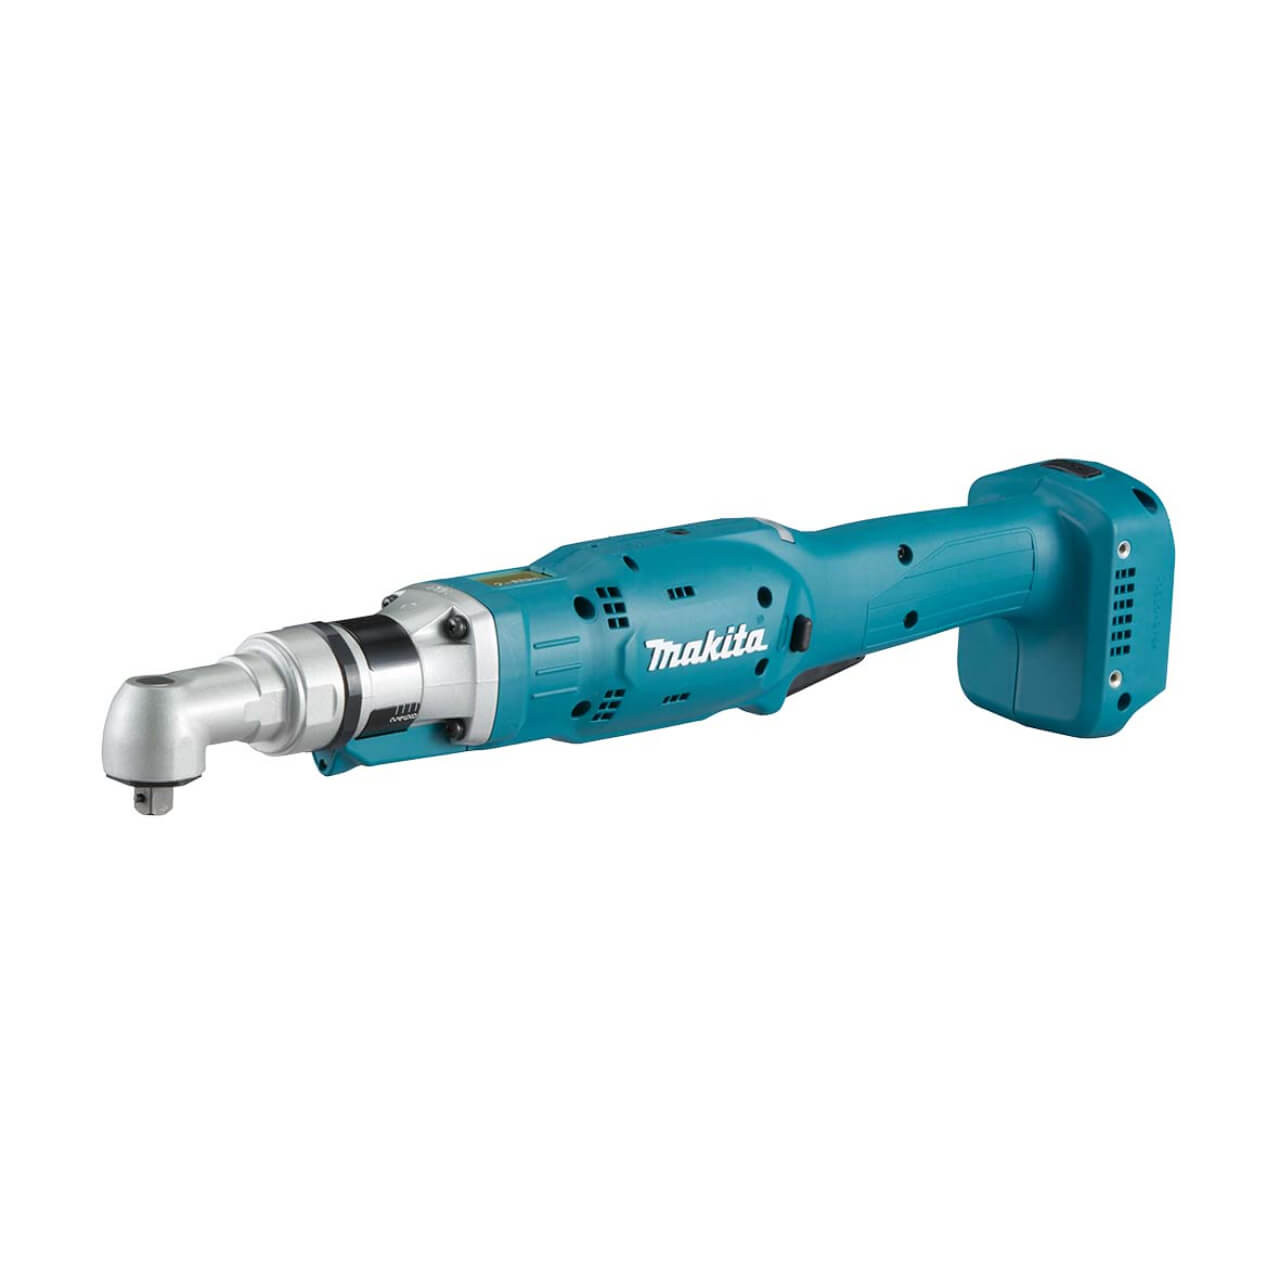 Makita 14.4V BRUSHLESS 3/8” Angled Torque Wrench. 2-8Nm. 150-700rpm - Tool Only